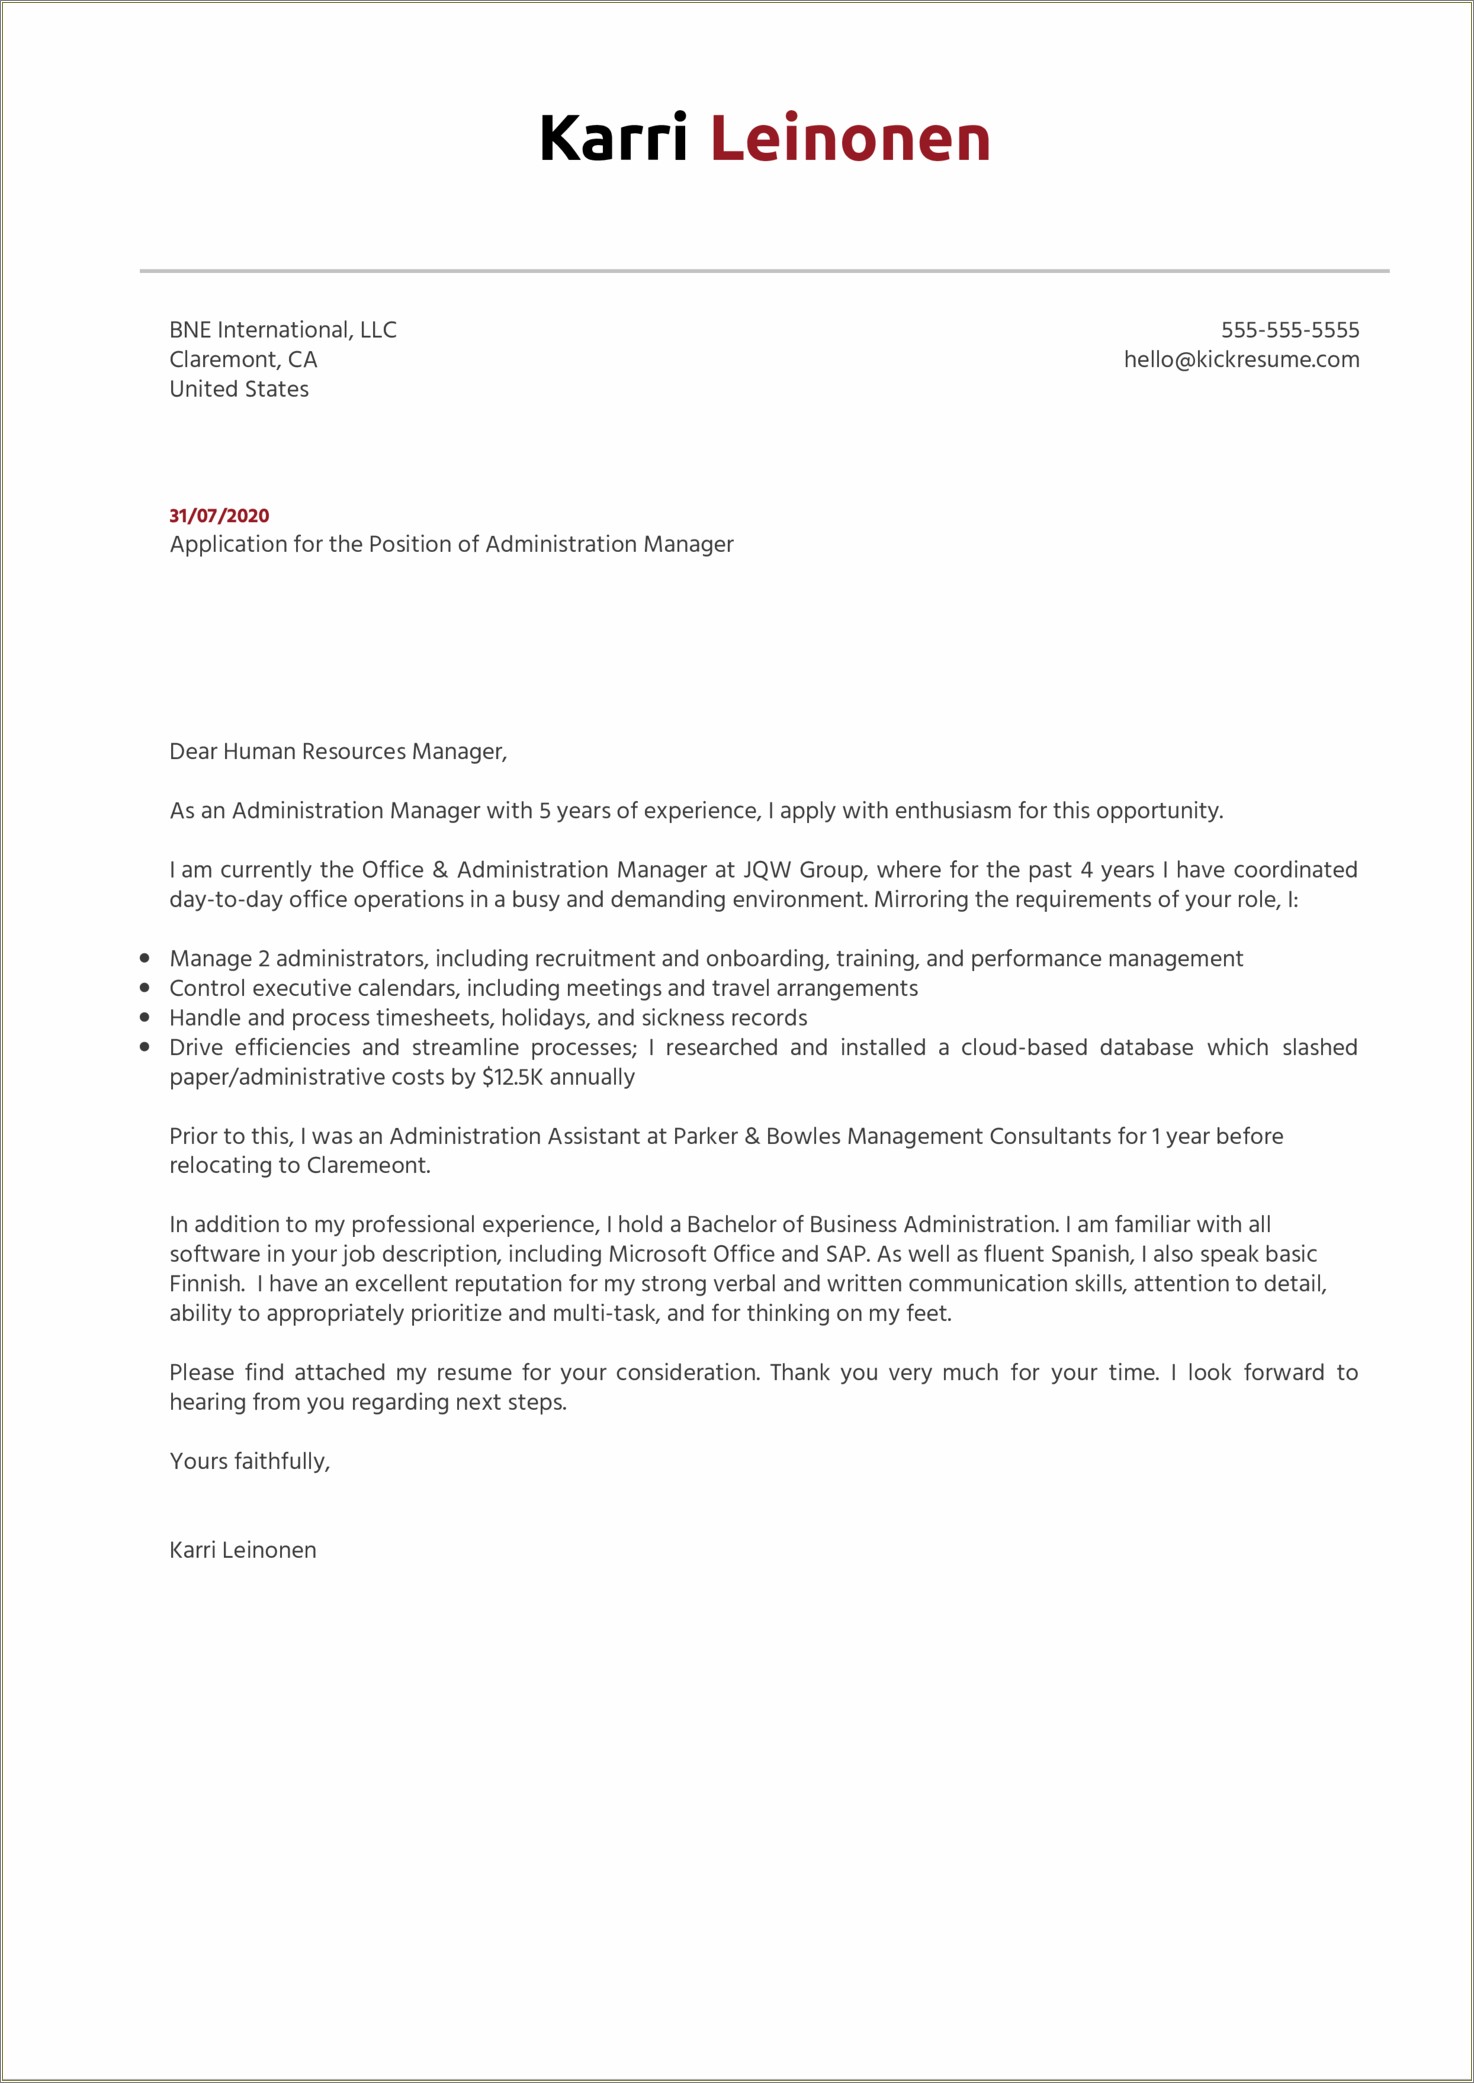 Resume Cover Letter Examples For Office Manager